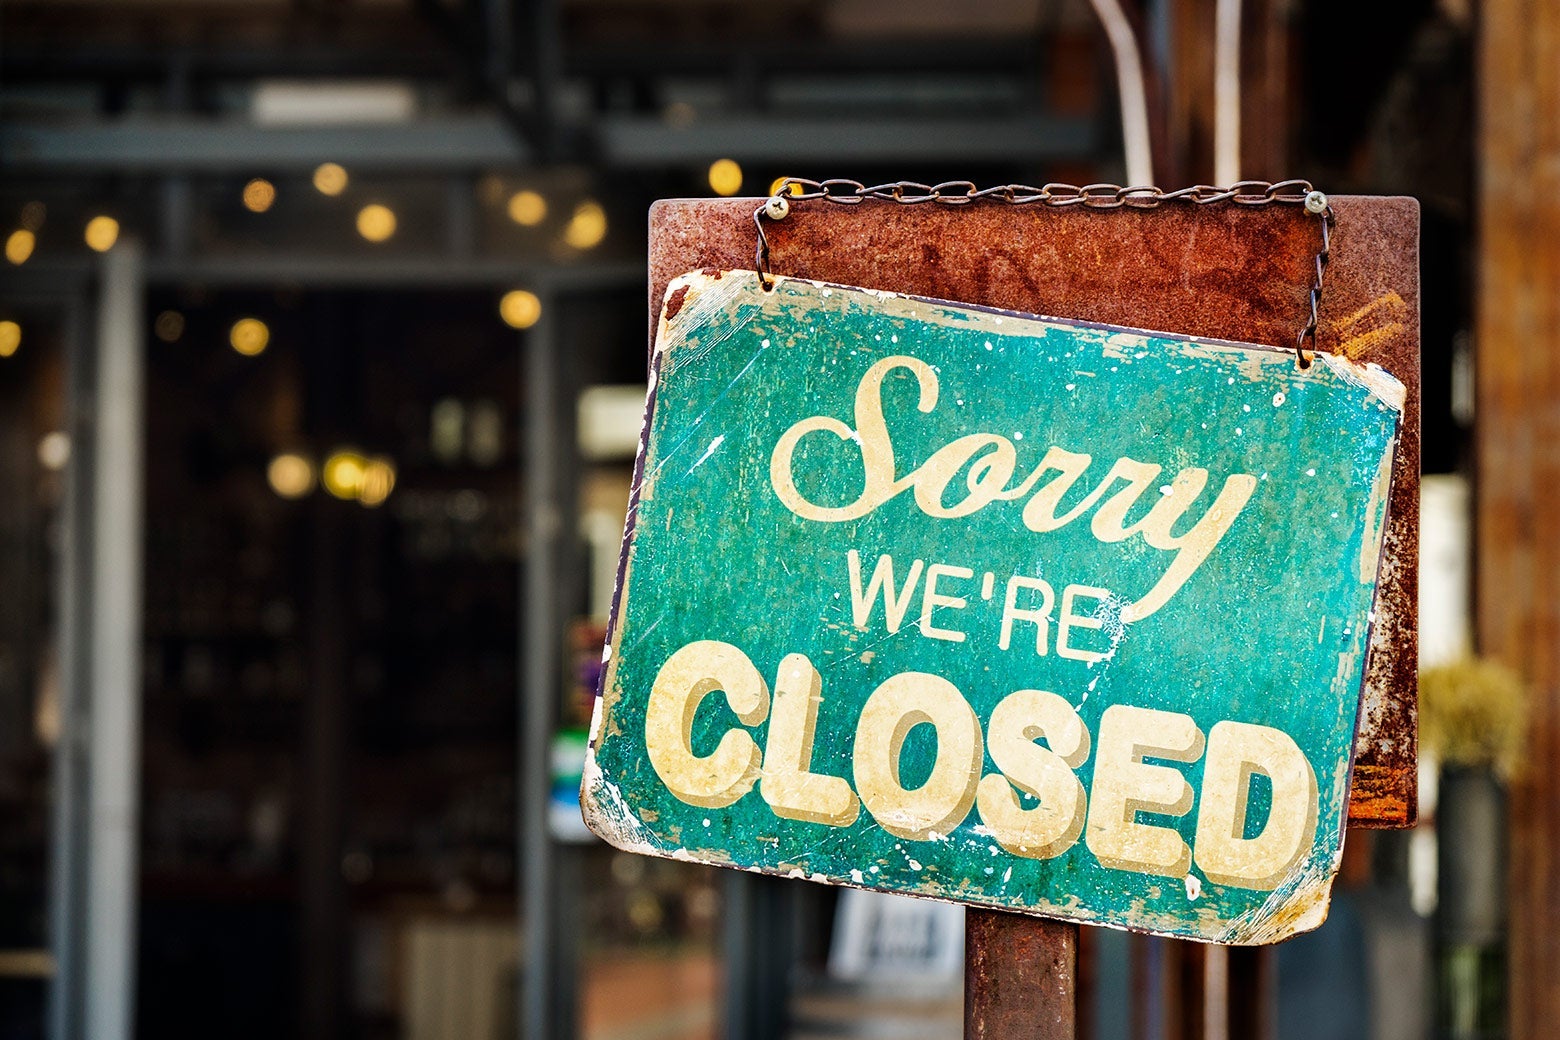 A sign says, "Sorry, we're closed."